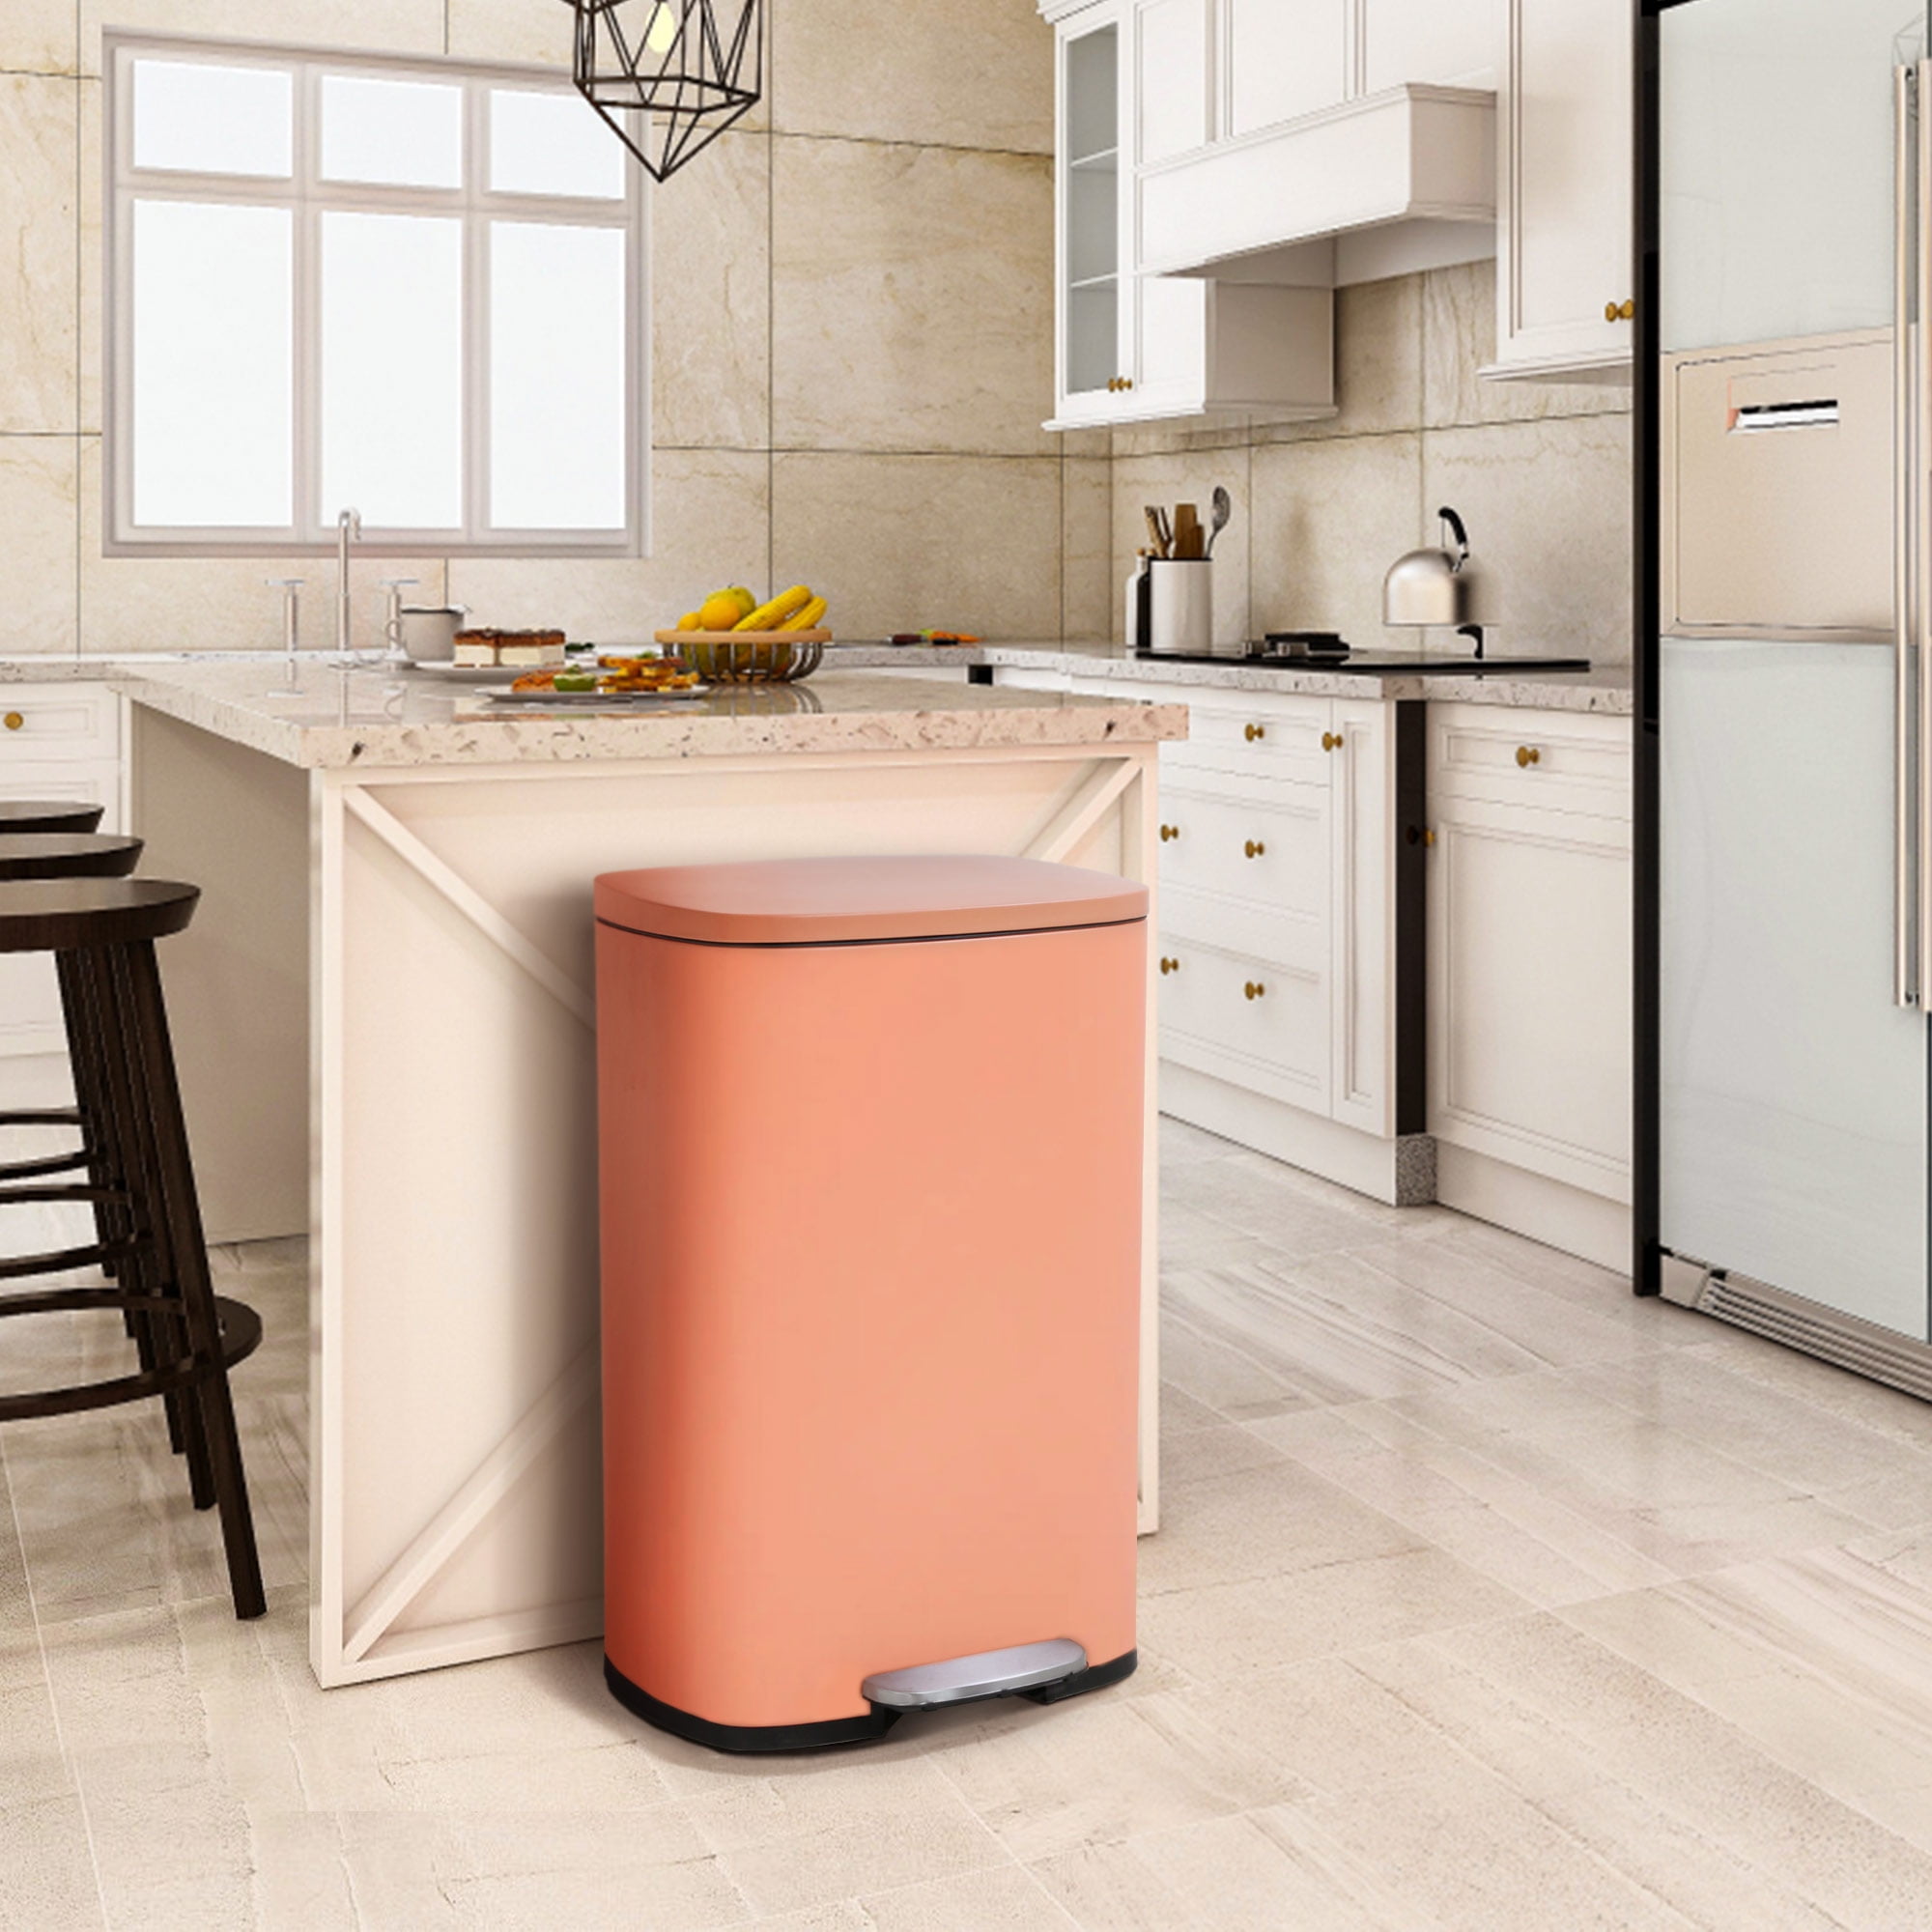 Kitchen Trash Can 13 Gallon-Kitchen Trash Can with Lid-Garbage Can Kitchen